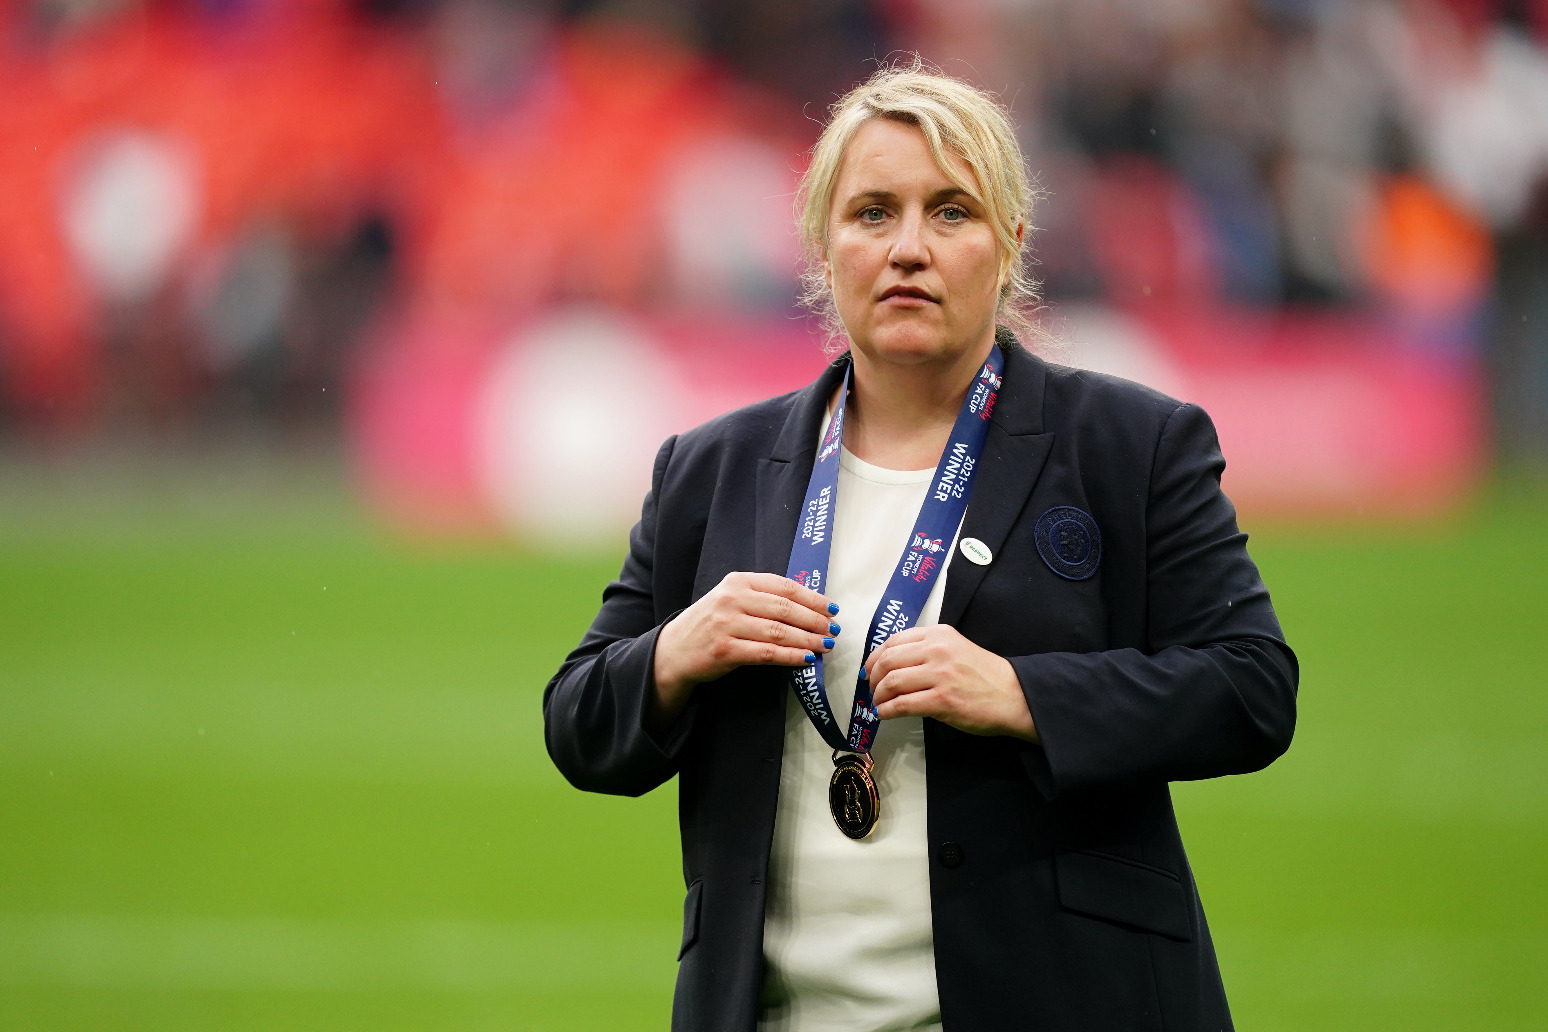 I’m under contract so nothing to talk about – Emma Hayes on her Chelsea future 